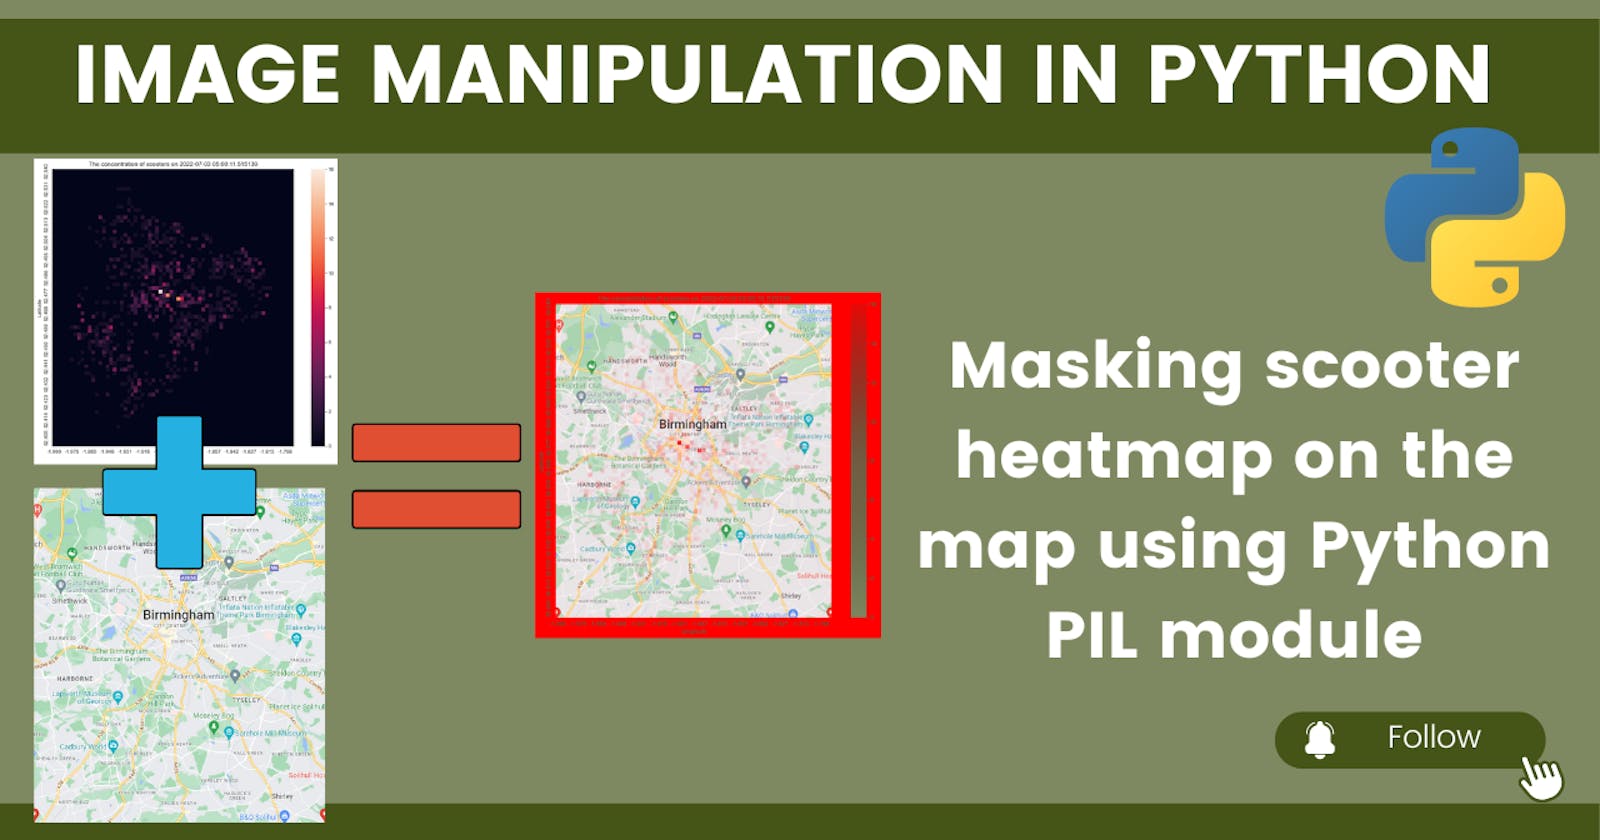 Where's my Voi scooter: [9] Masking scooter heatmap on the map using Python PIL module